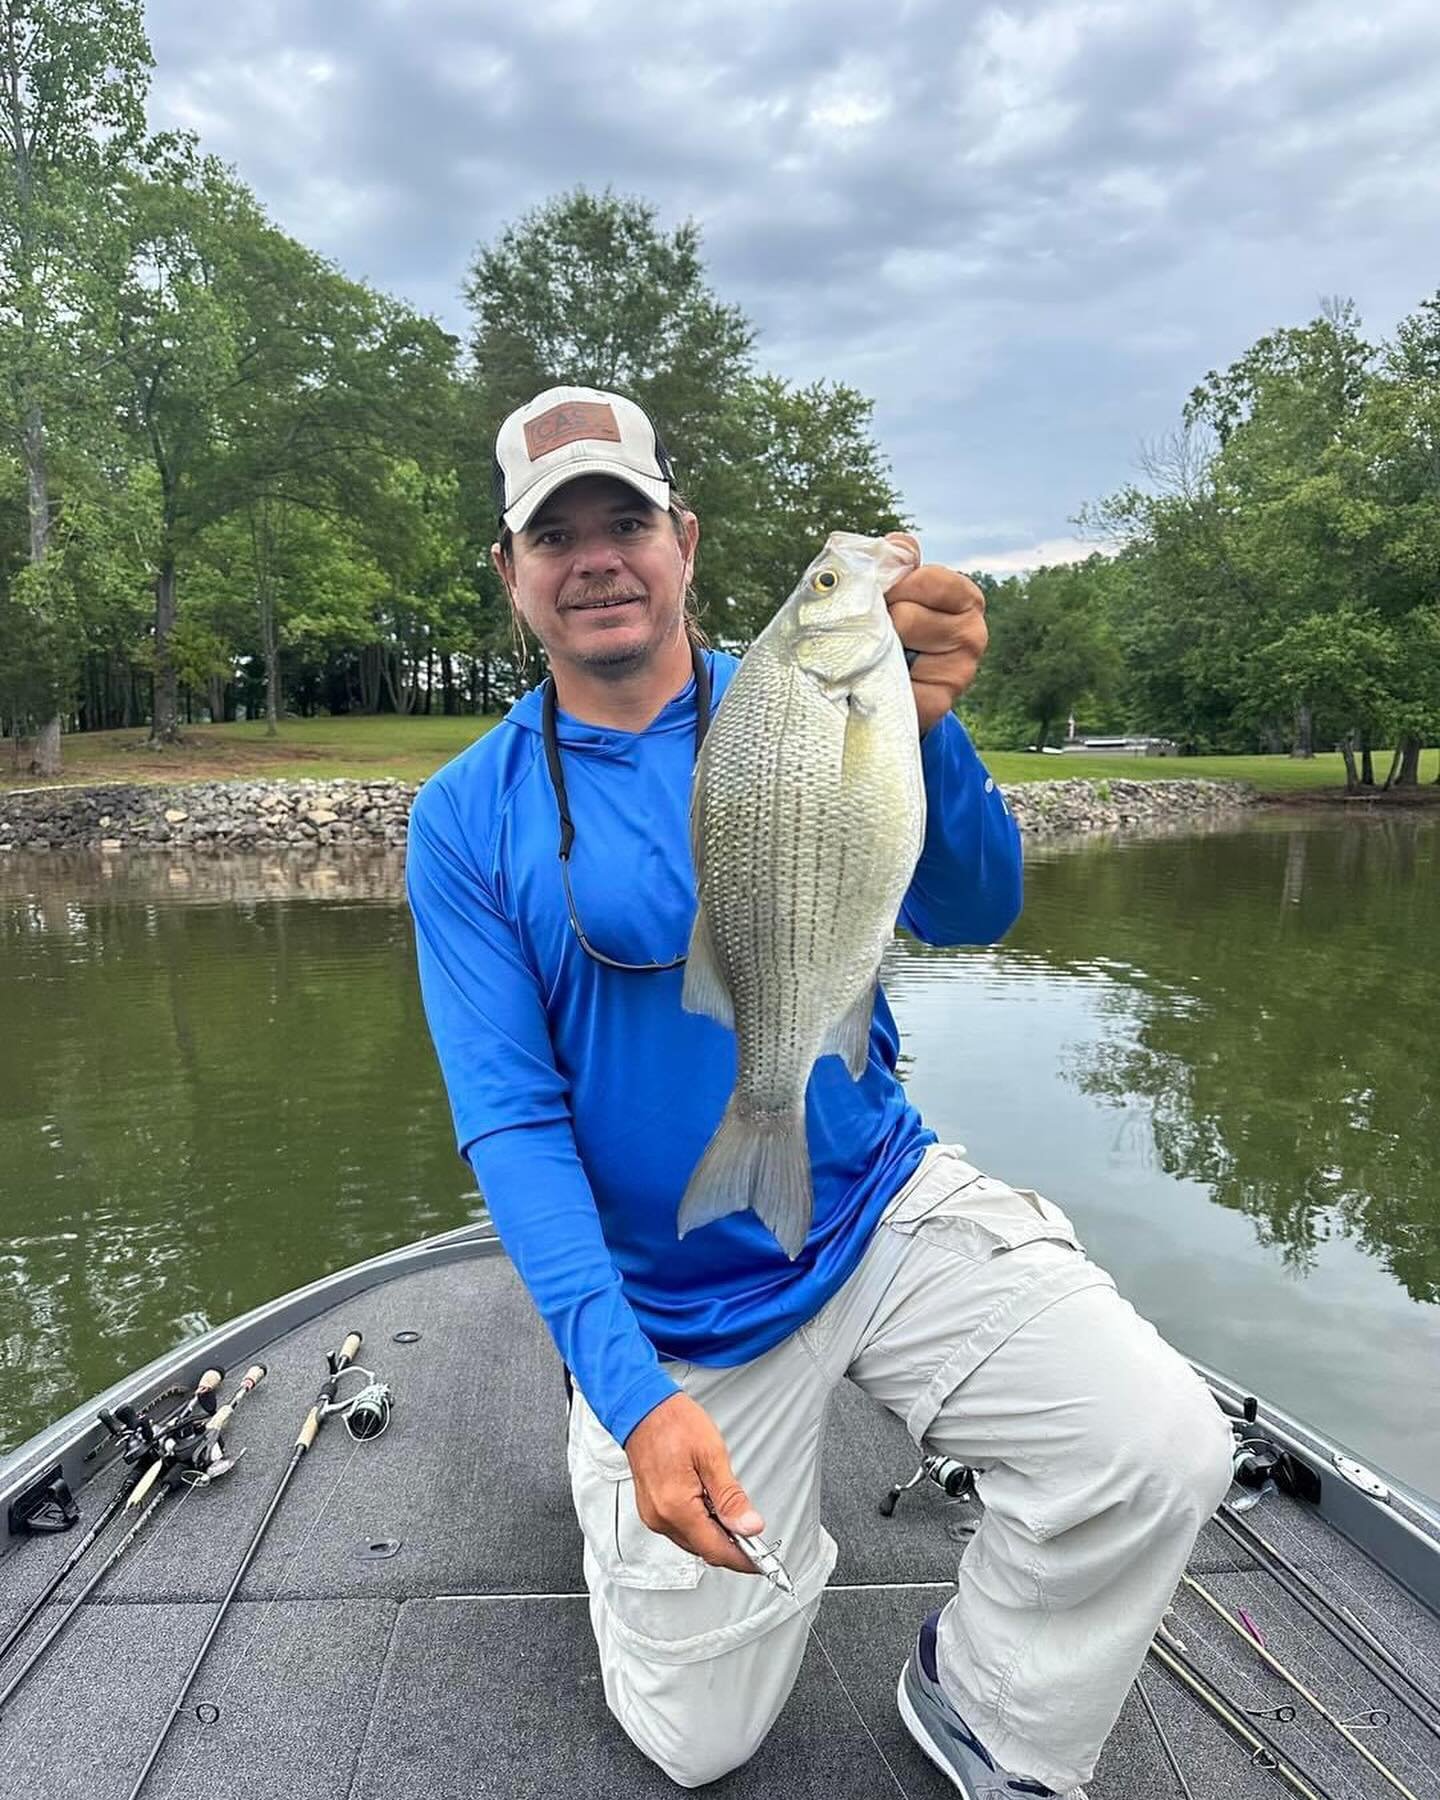 My free weekly written report is up. Check it out to see what newest @castfishing.co product I&rsquo;m using this week. 

https://www.jeffnailfishing.net/lake-lanier-weekly-reports/may32024 

@stcroixrods @gillfishing @castfishing.co @hammondsfishing